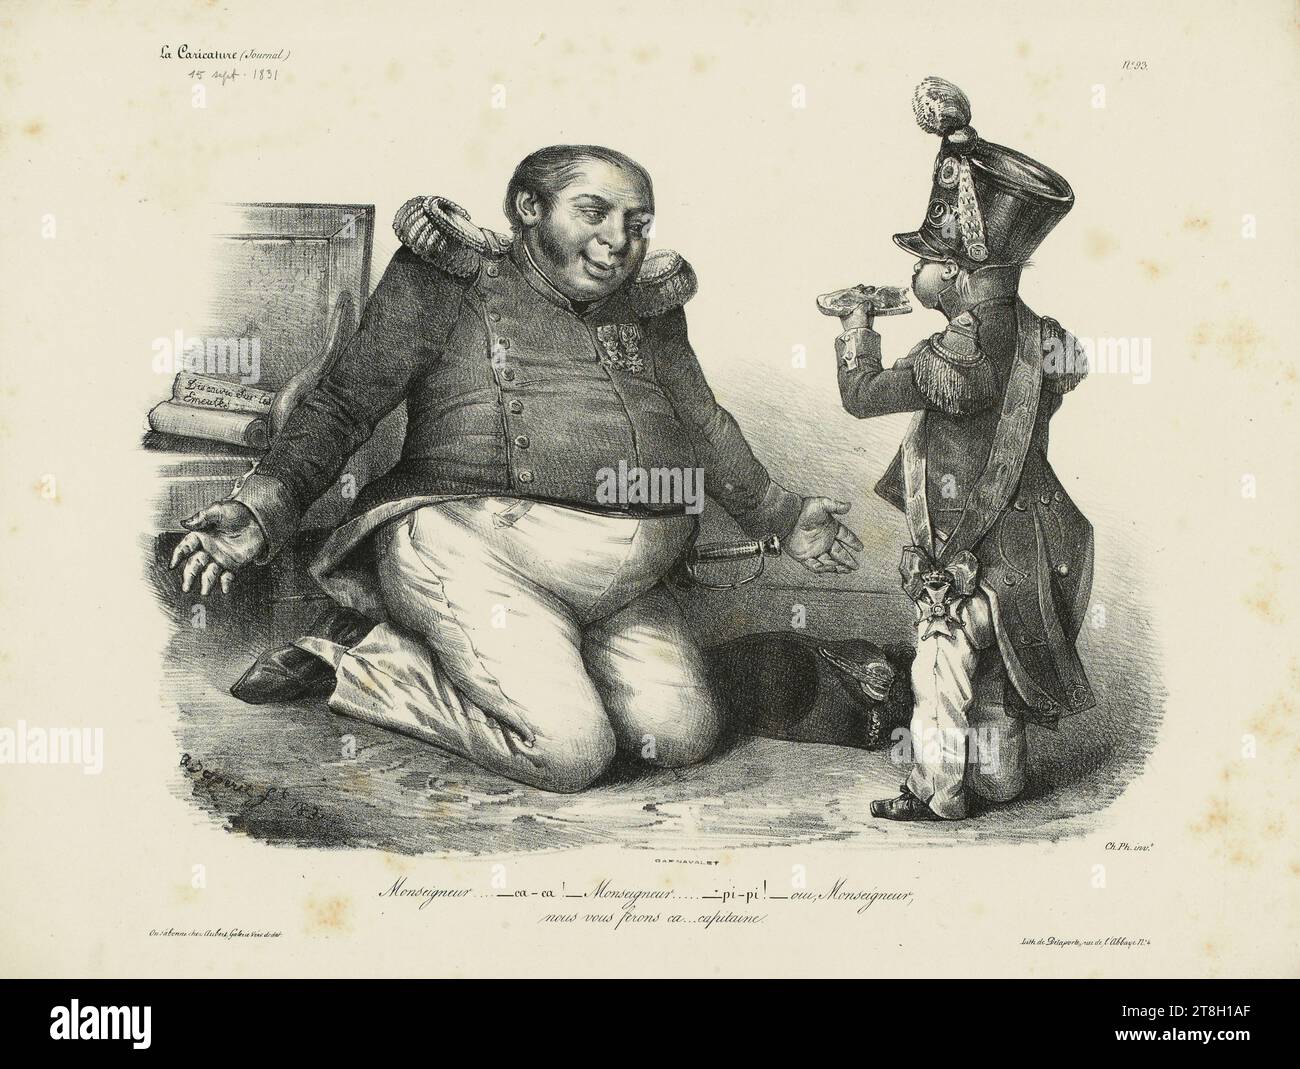 N°93, La caricature (newspaper), Monseigneur.... ca-ca! Monseigneur..... pi-pi! oui, Monseigneur ..., Draftsman-lithographer, Delaporte, Victor Hippolyte, Printer-lithographer, Aubert, Publisher, Around 1831, Print, Graphic arts, Print, Lithography, Dimensions - Work: Height: 28 cm, Width: 37.6 cm Stock Photo